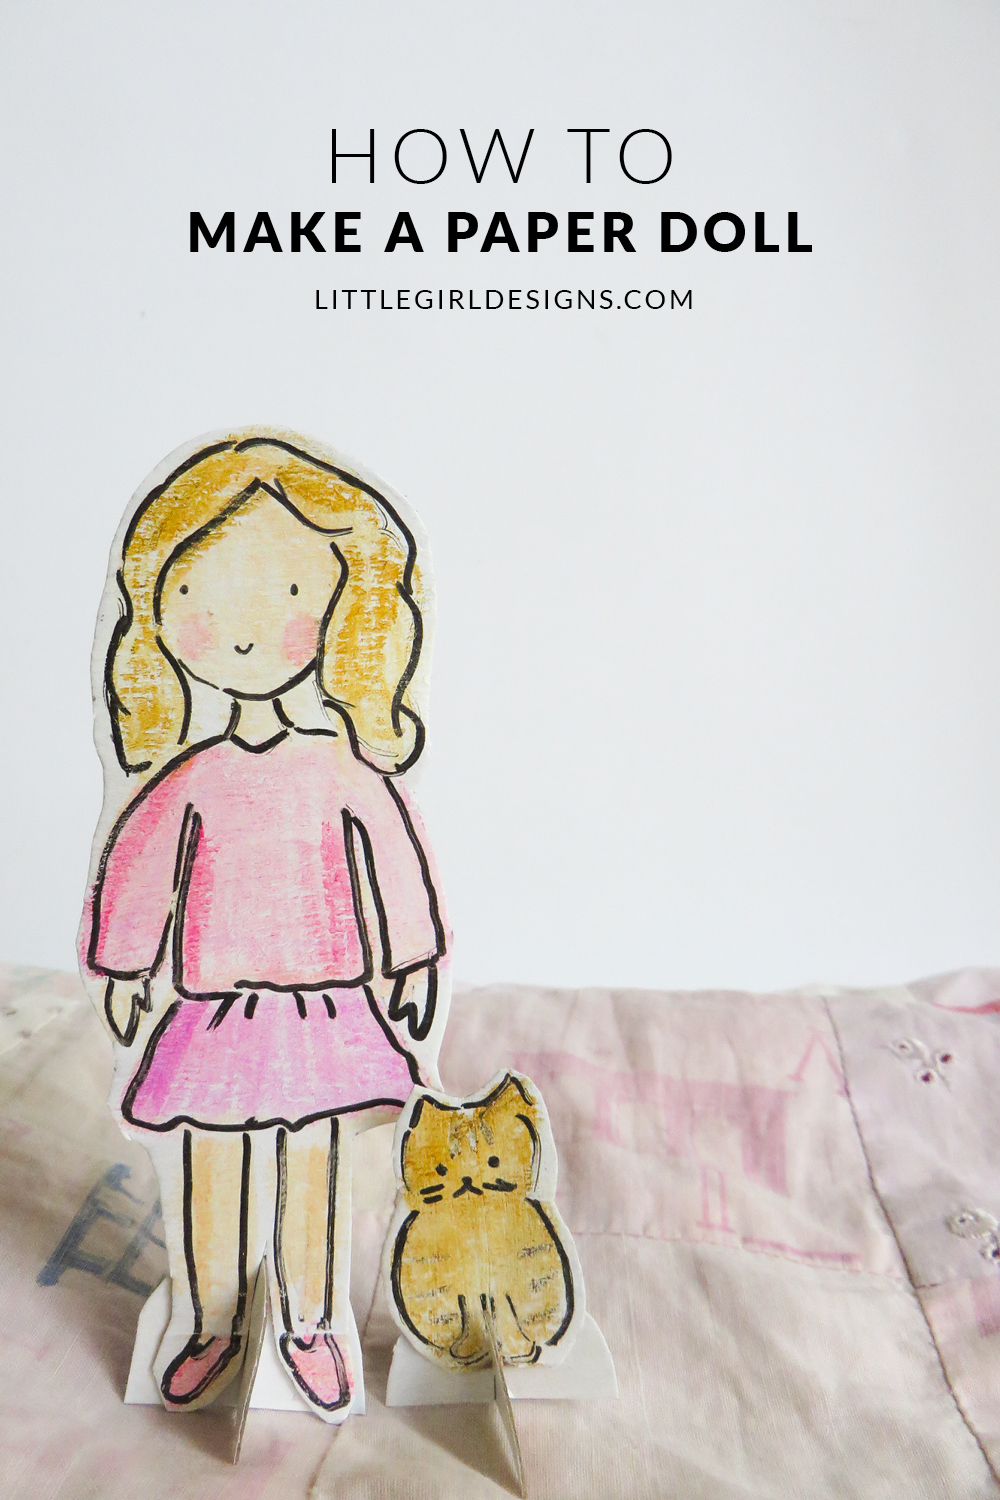 How to Make a Paper Doll - Here's a tutorial on how to make a sweet paper doll and her friend. You'll love how easy this is and might not want to give it away when you're finished! :) via littlegirldesigns.com